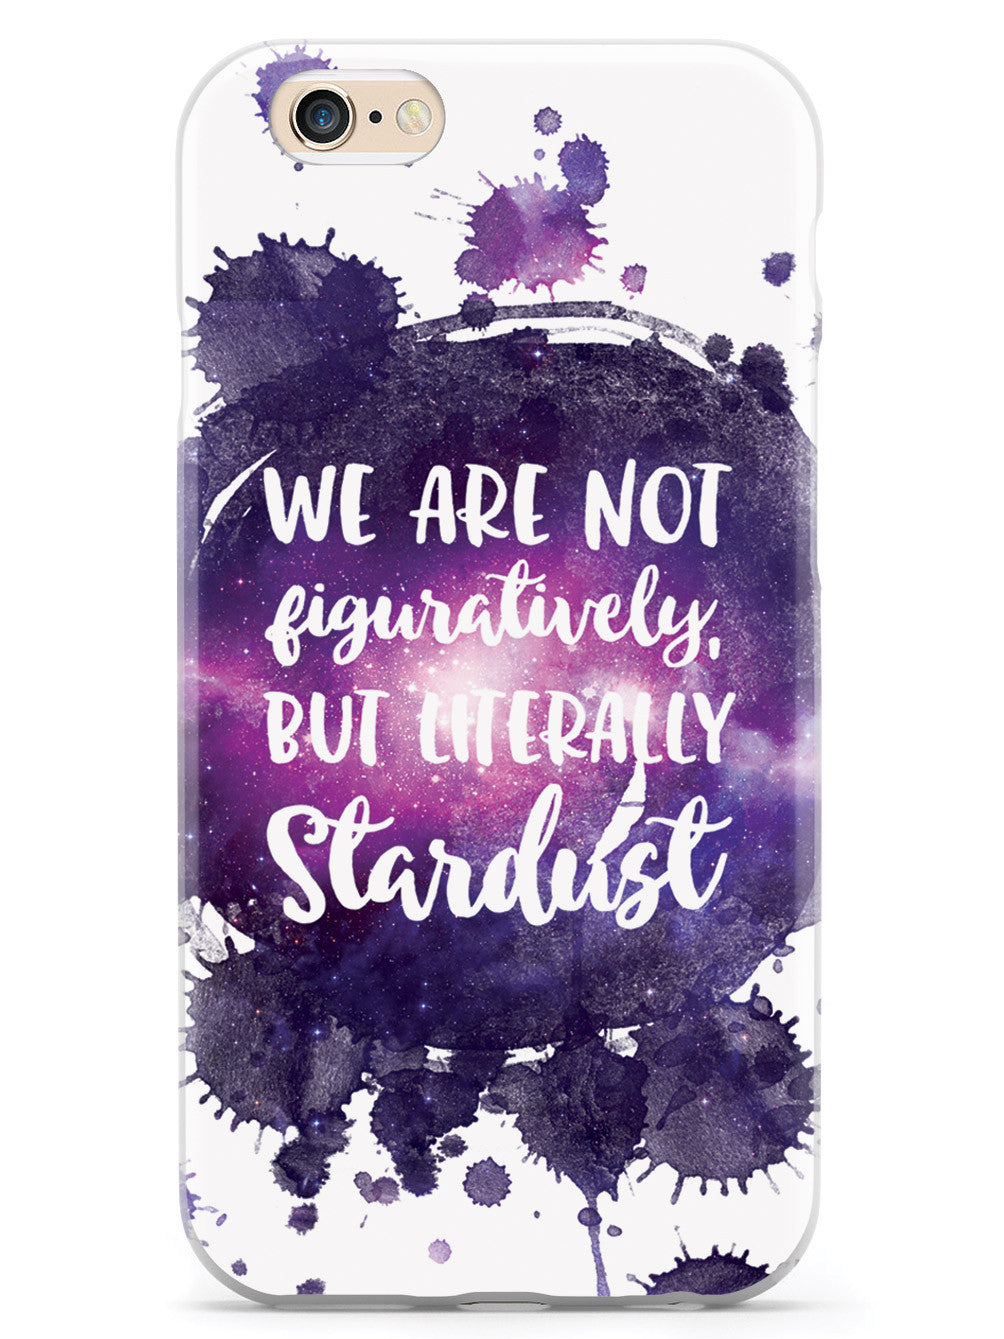 We are Stardust - Neil deGrasse Tyson Quote Case